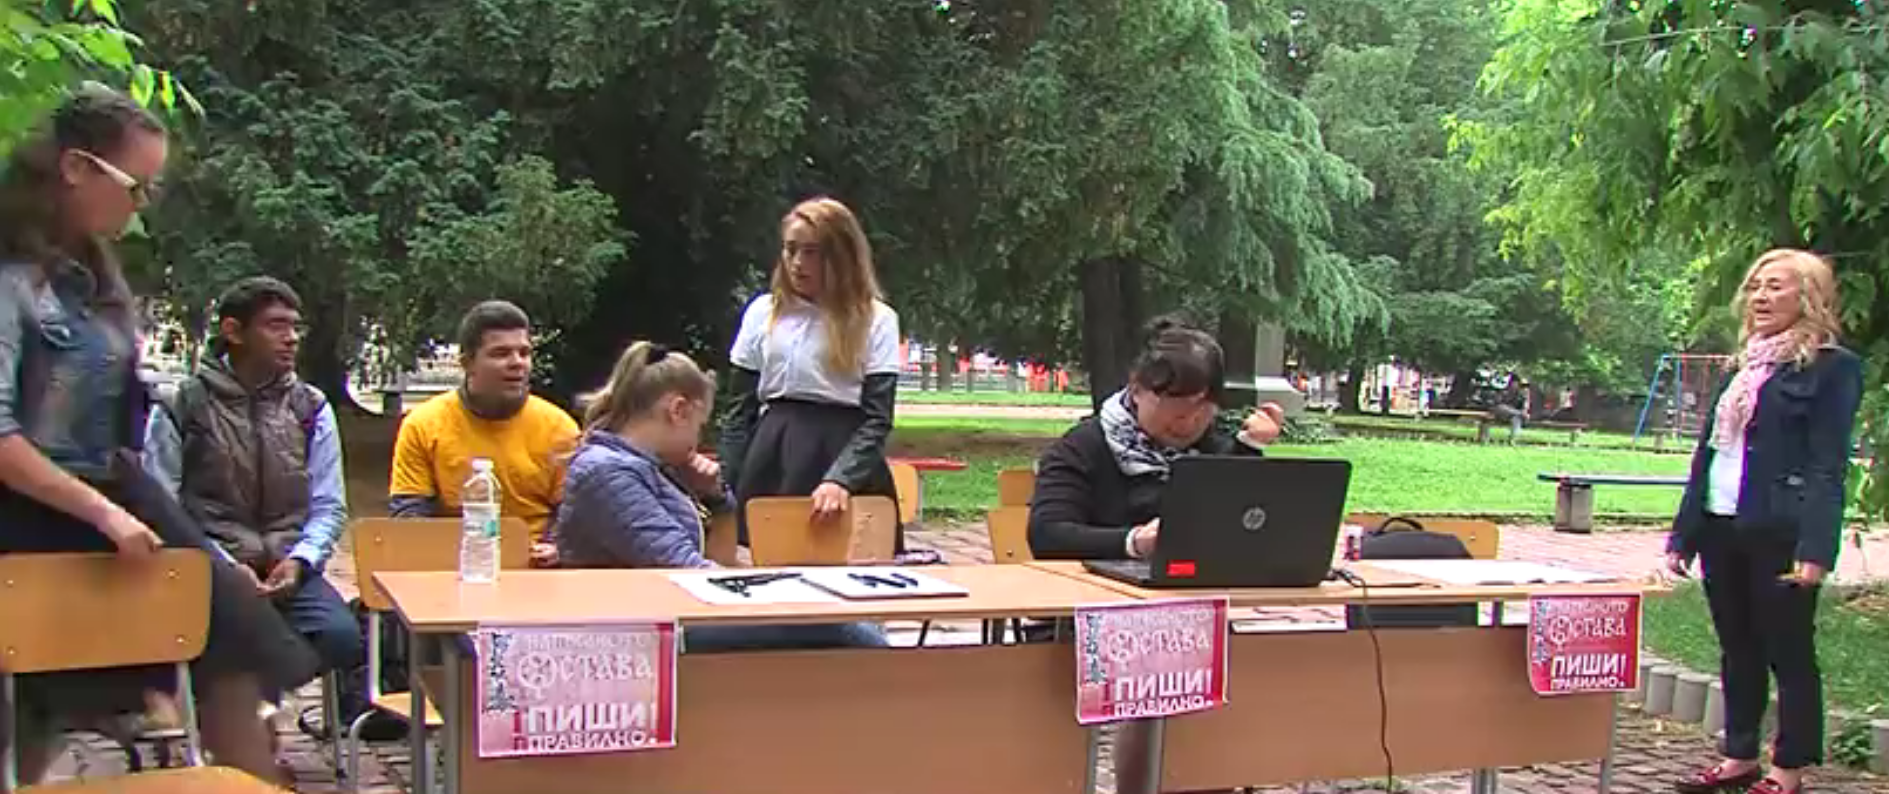 The pupils from Aksakov High School showed how important it is to write correctly